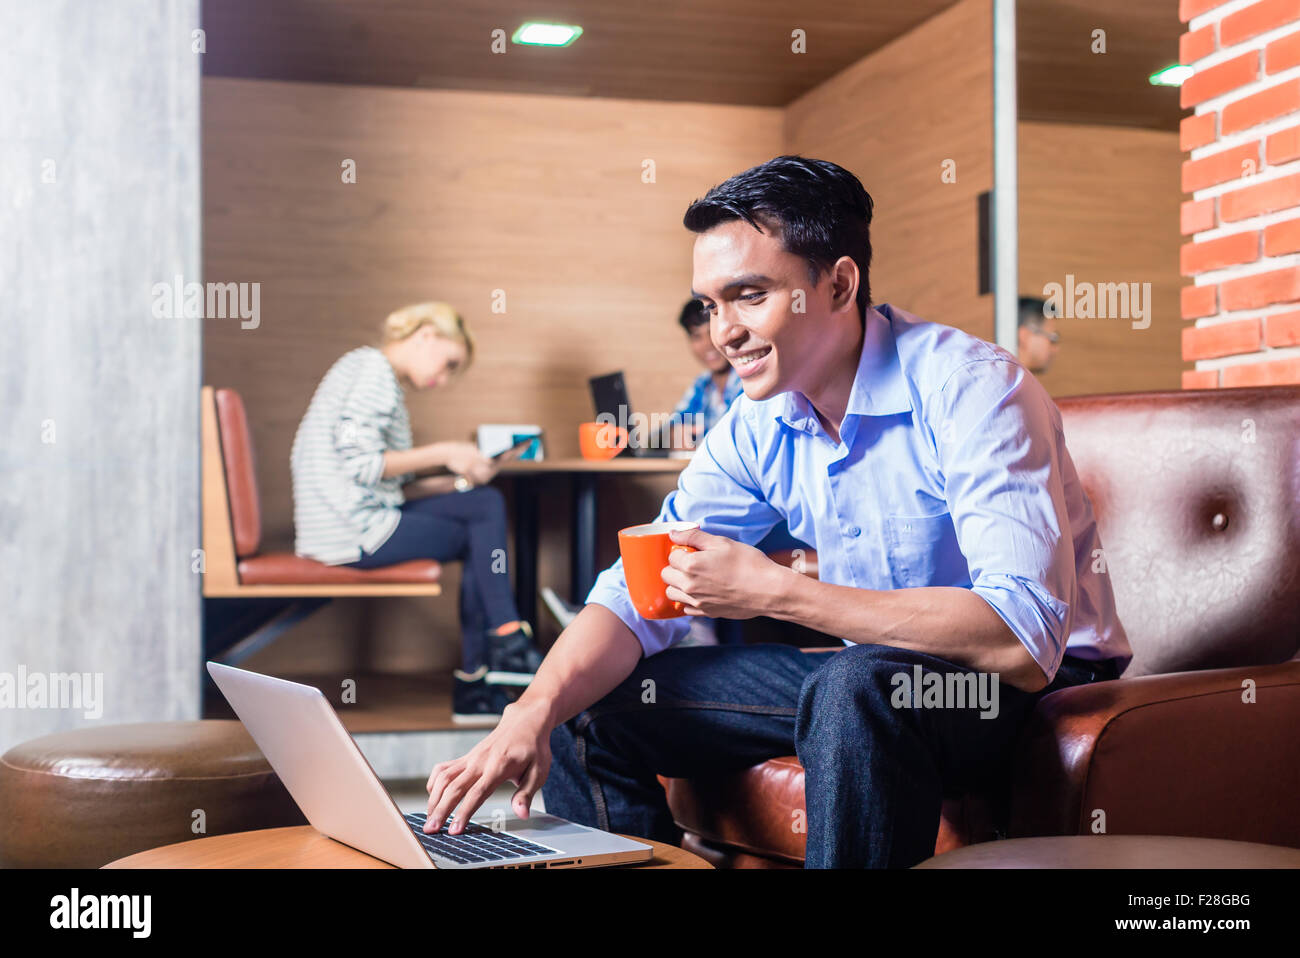 Creative business people in coworking office Stock Photo